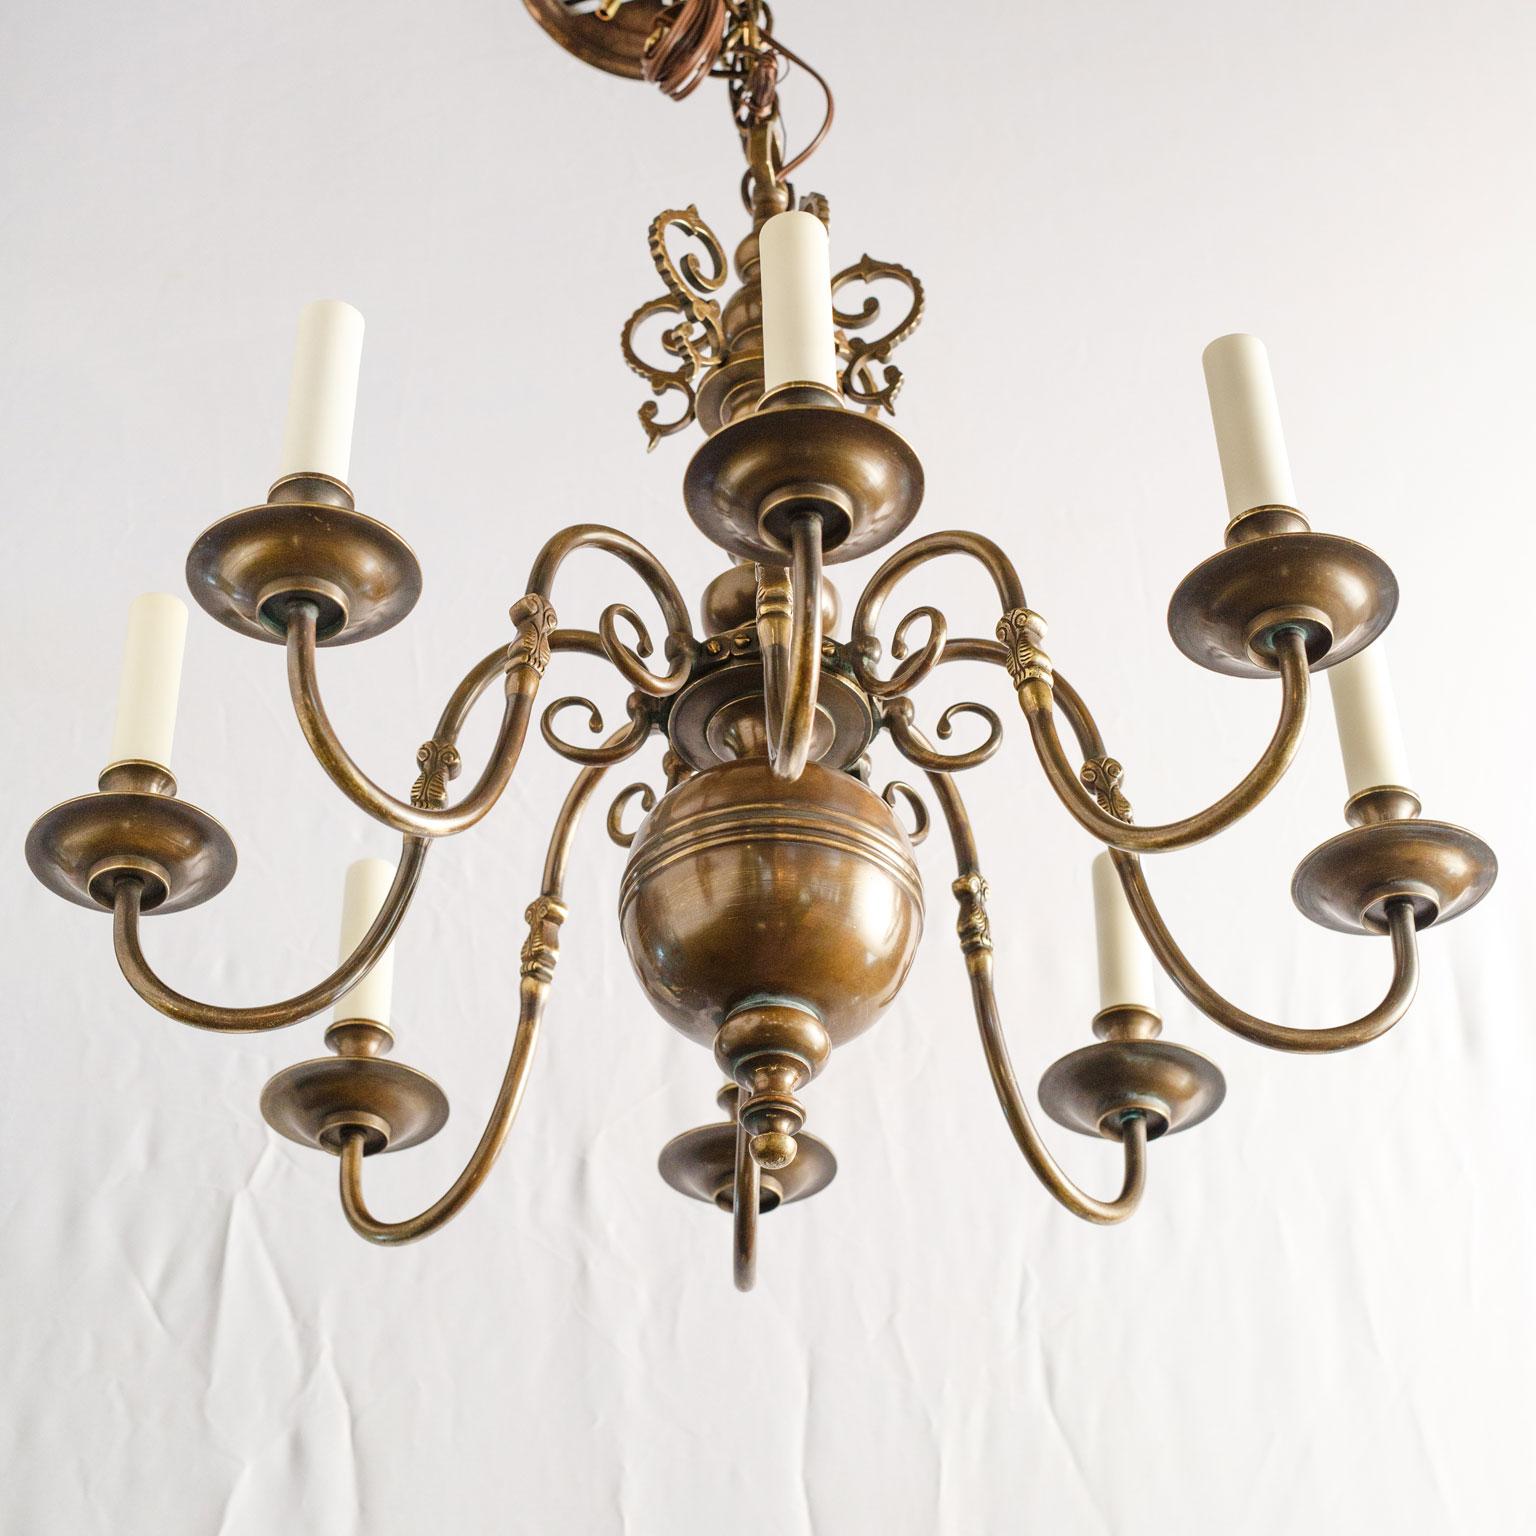 Mid-20th Century Smaller Scale Georgian Style Chandelier For Sale